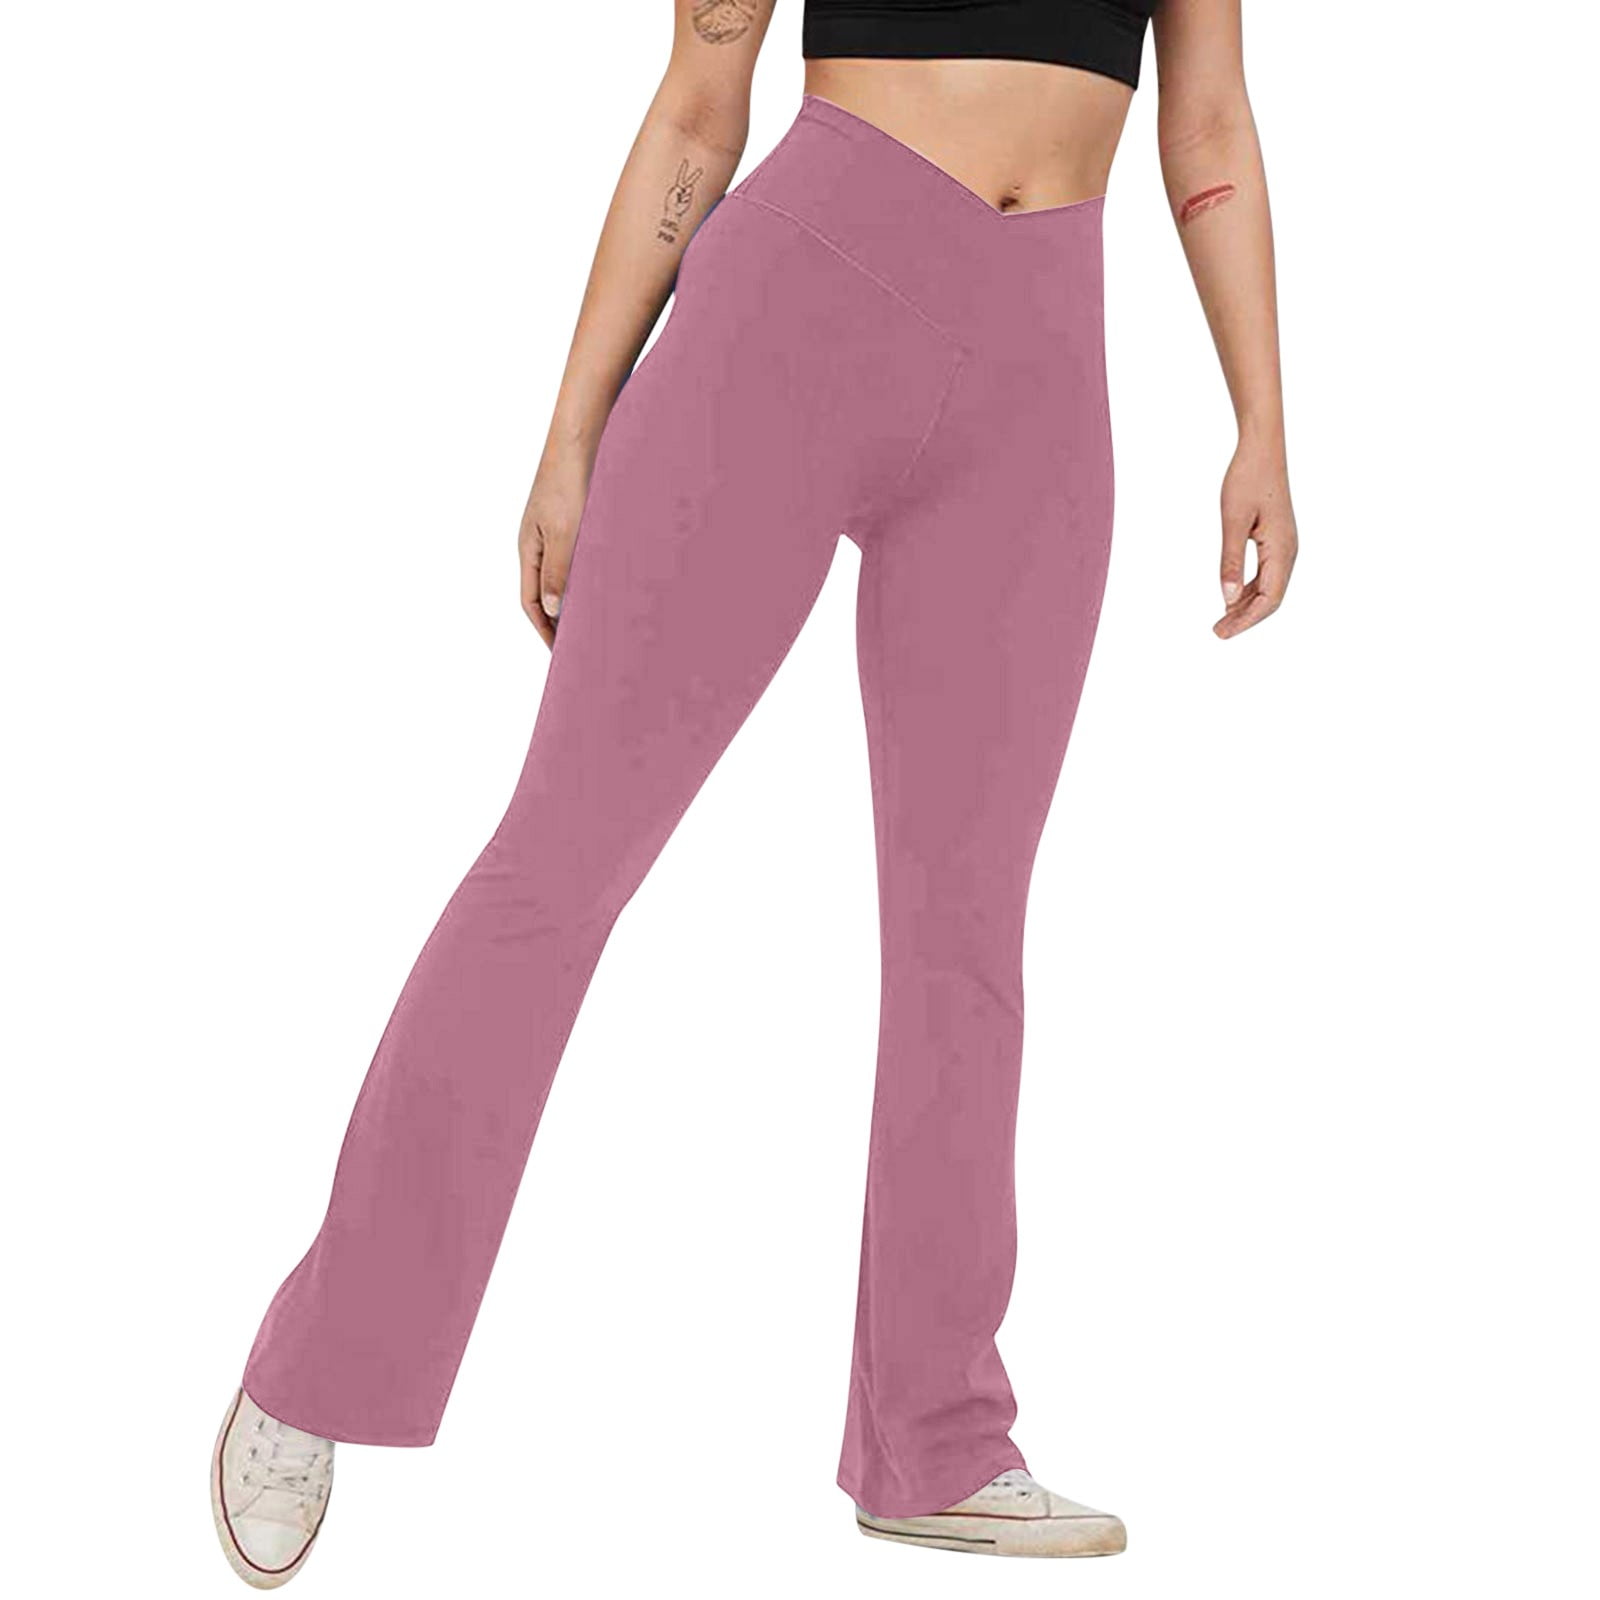 HSMQHJWE Flare Yoga Pants for Teens Women Solid Workout Out